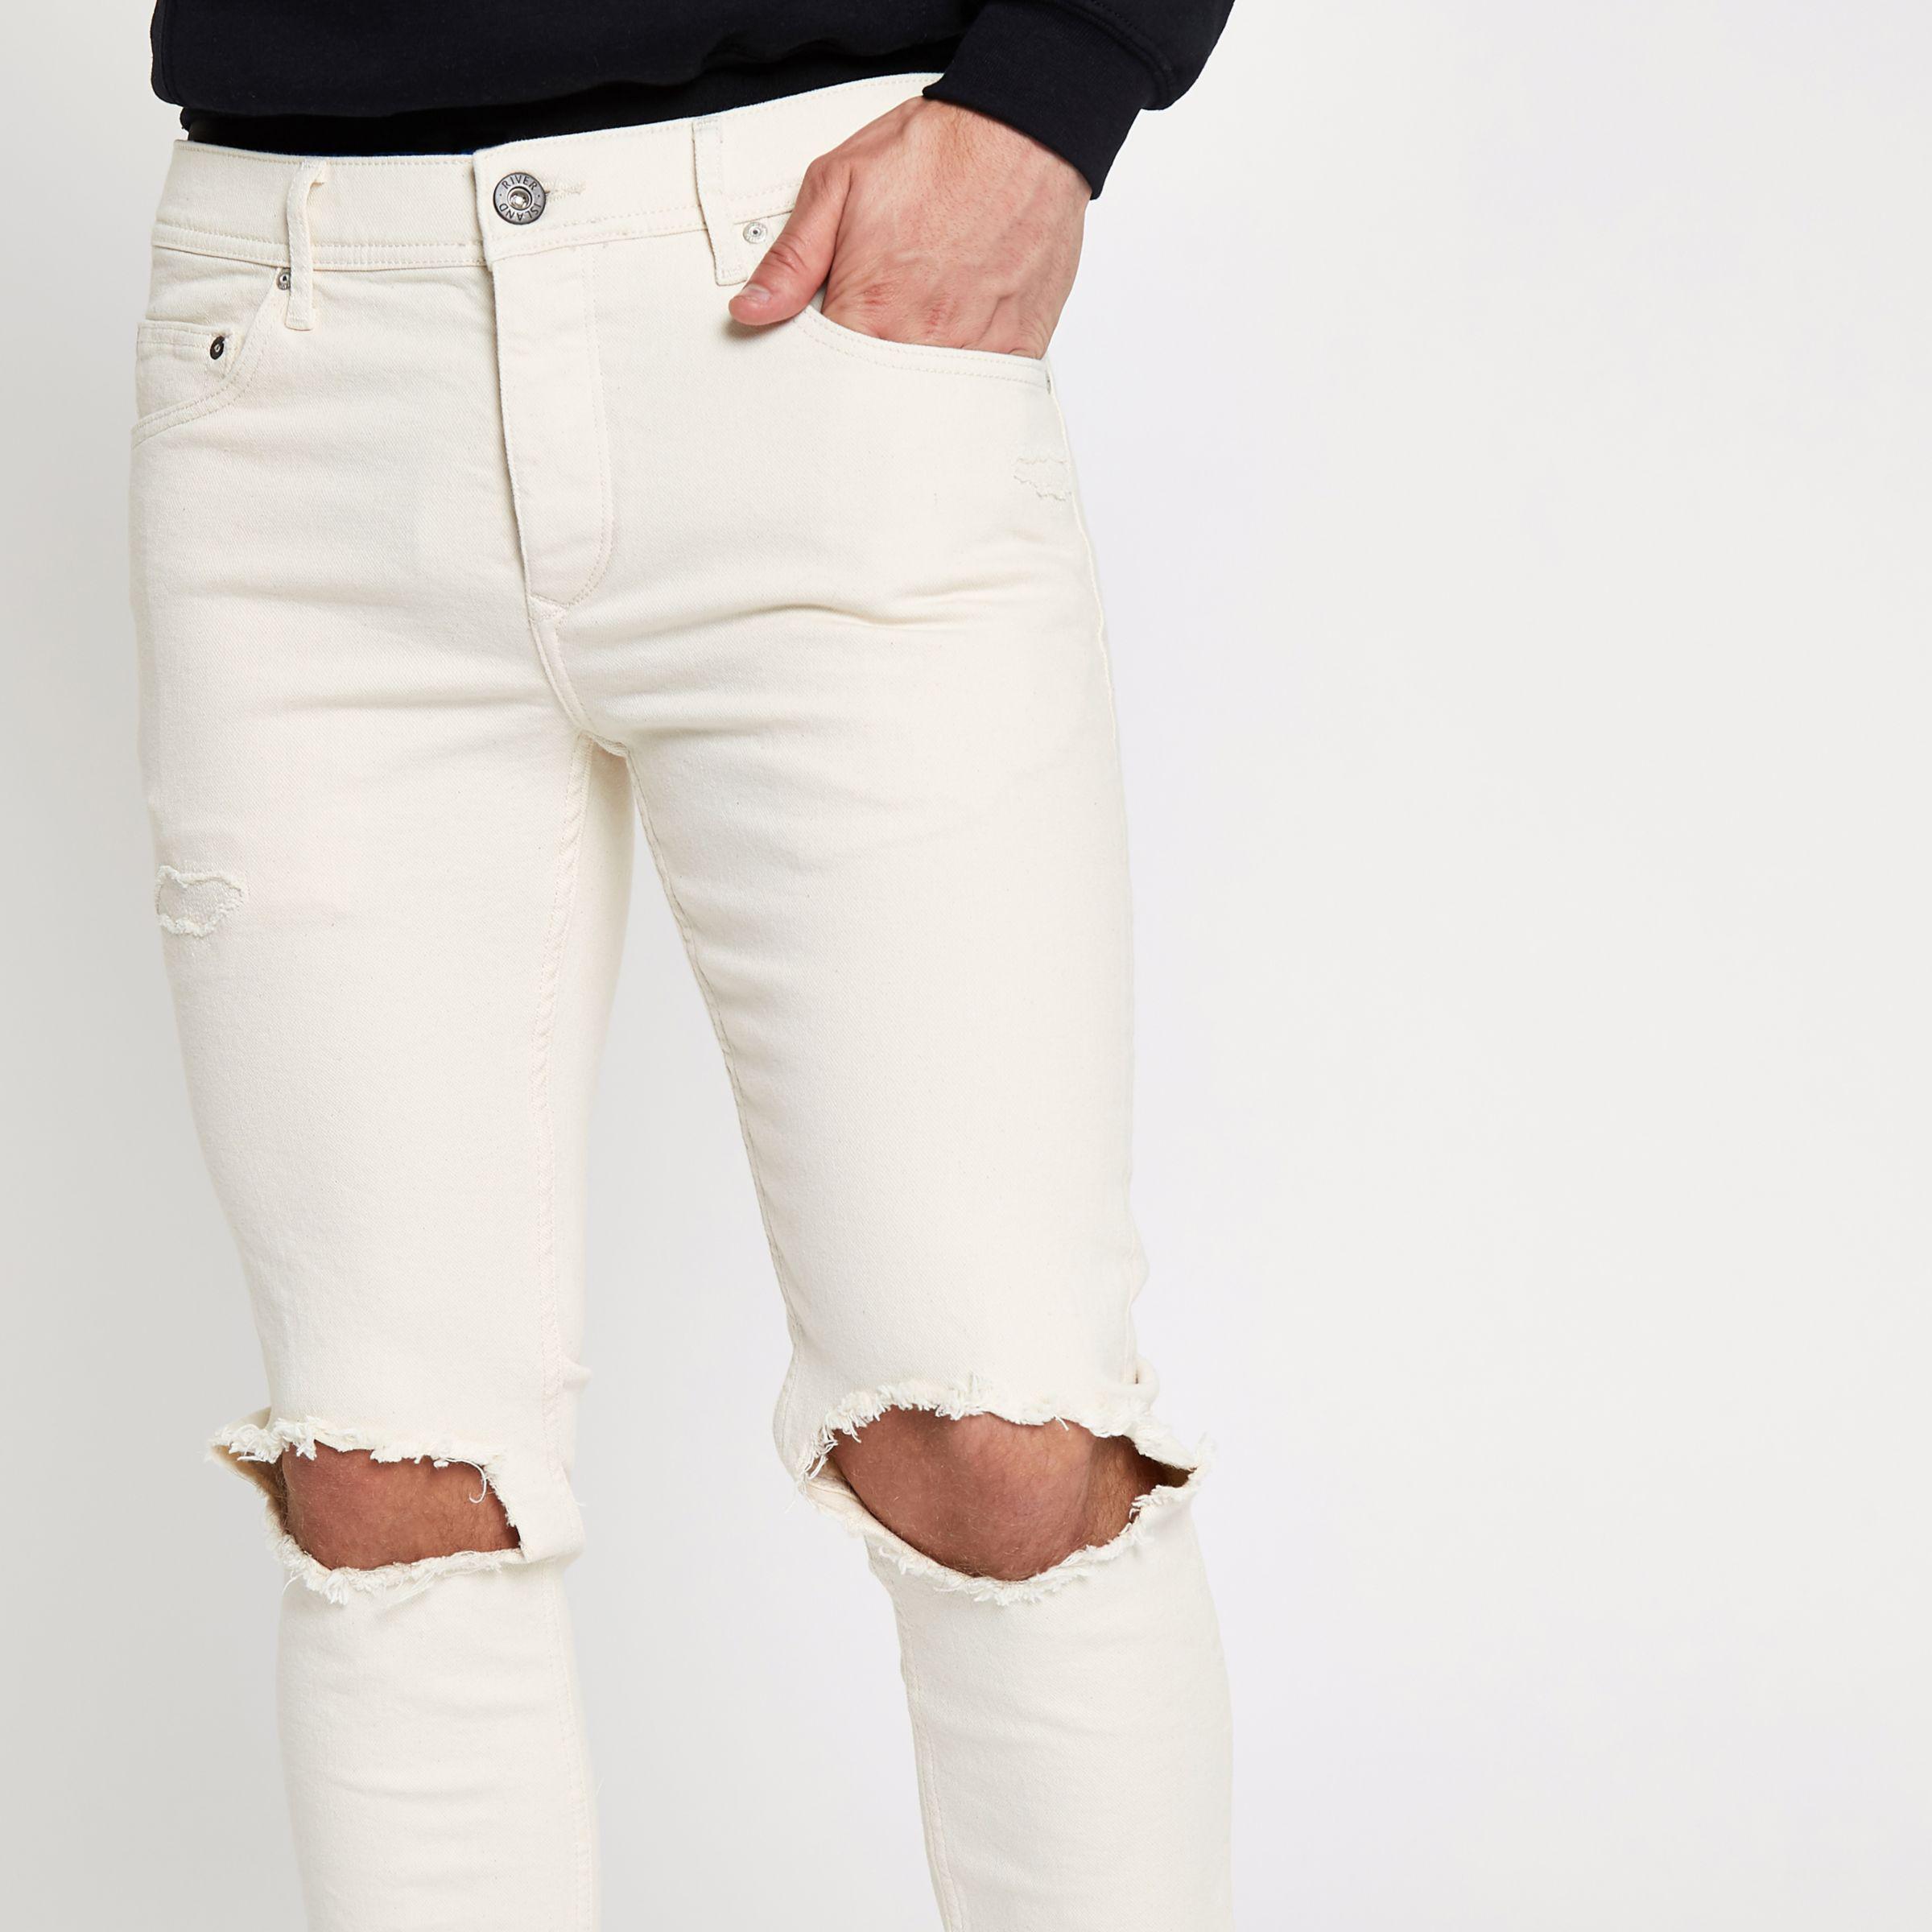 Homme River Island Ripped Jeans-W26/L32 neuf avec étiquettes-RRP £ 48